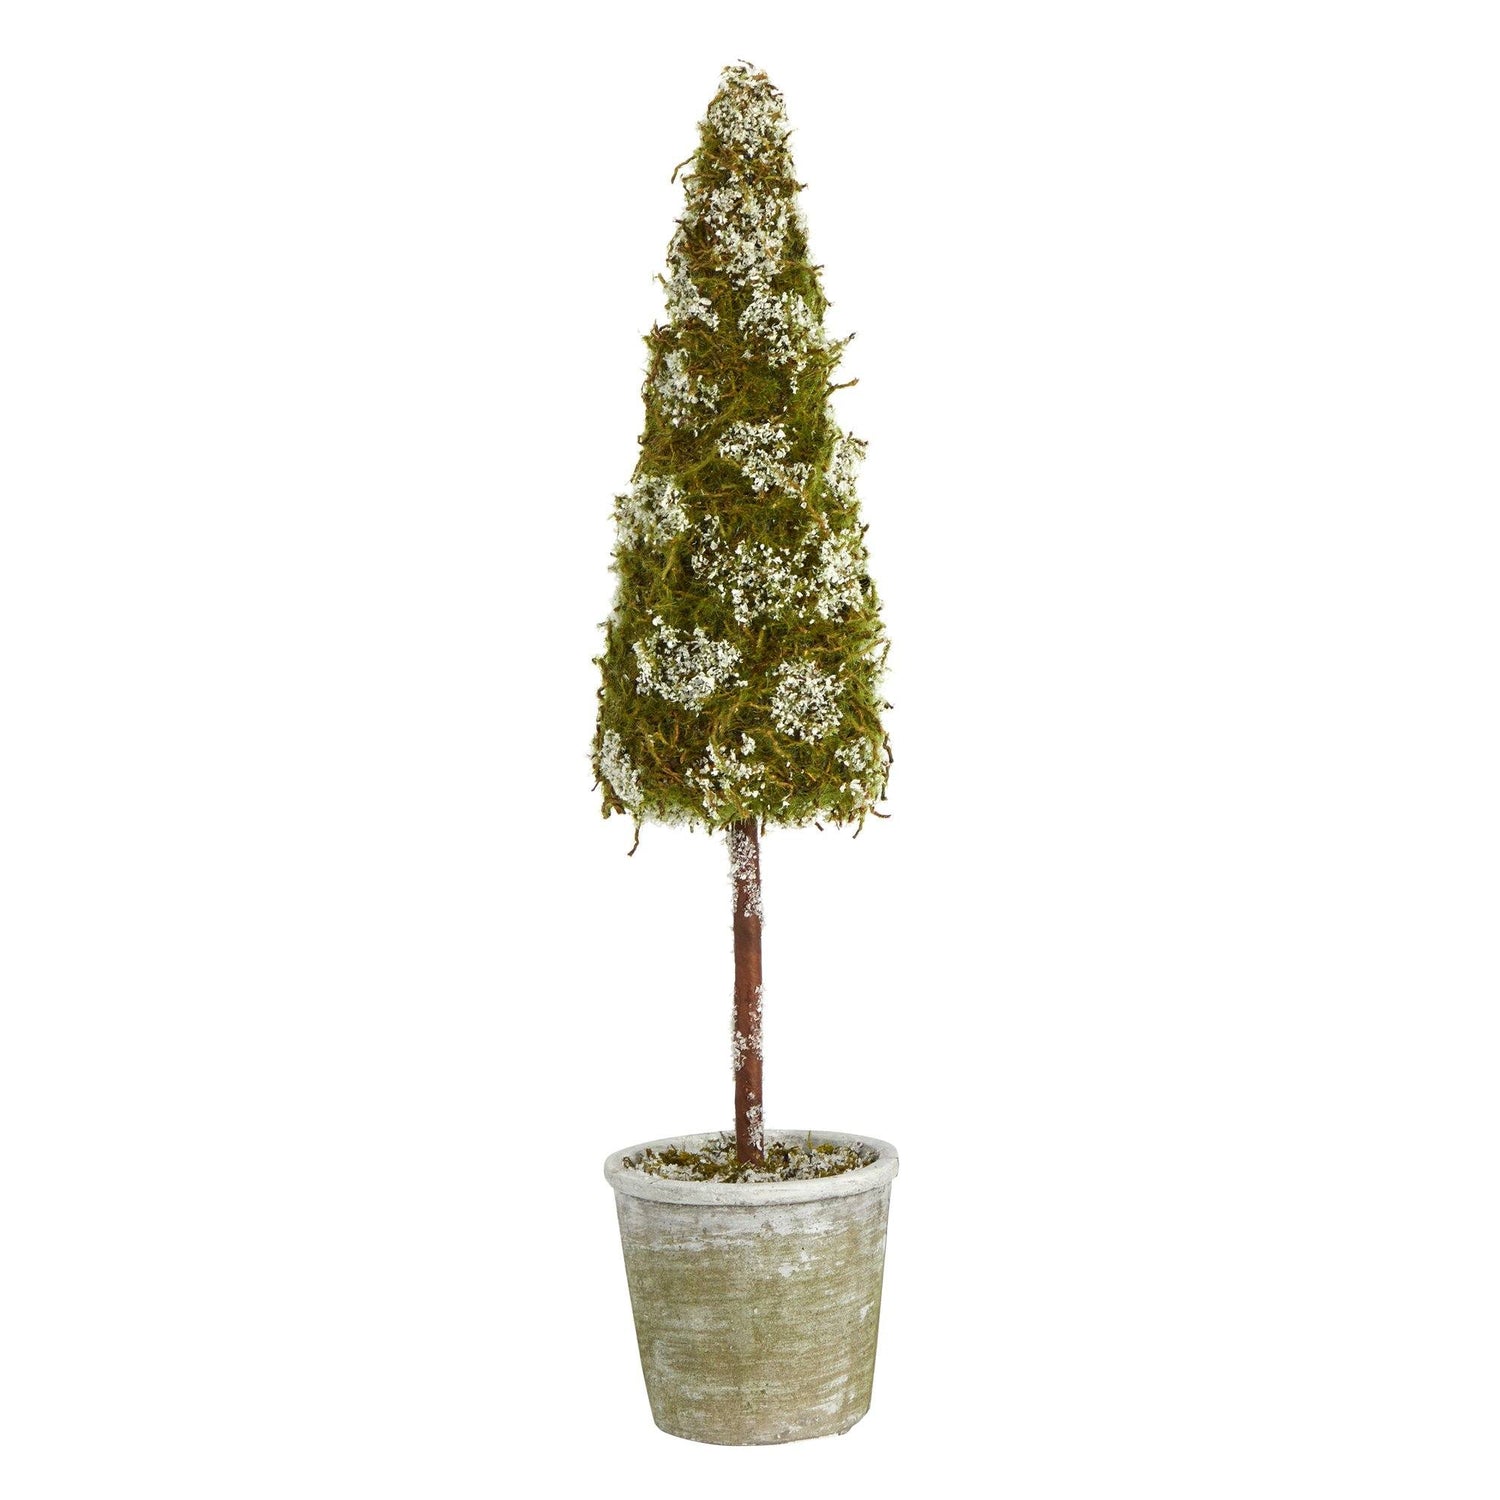 2’ Flocked Moss Artificial Christmas Tree in Decorative Planter